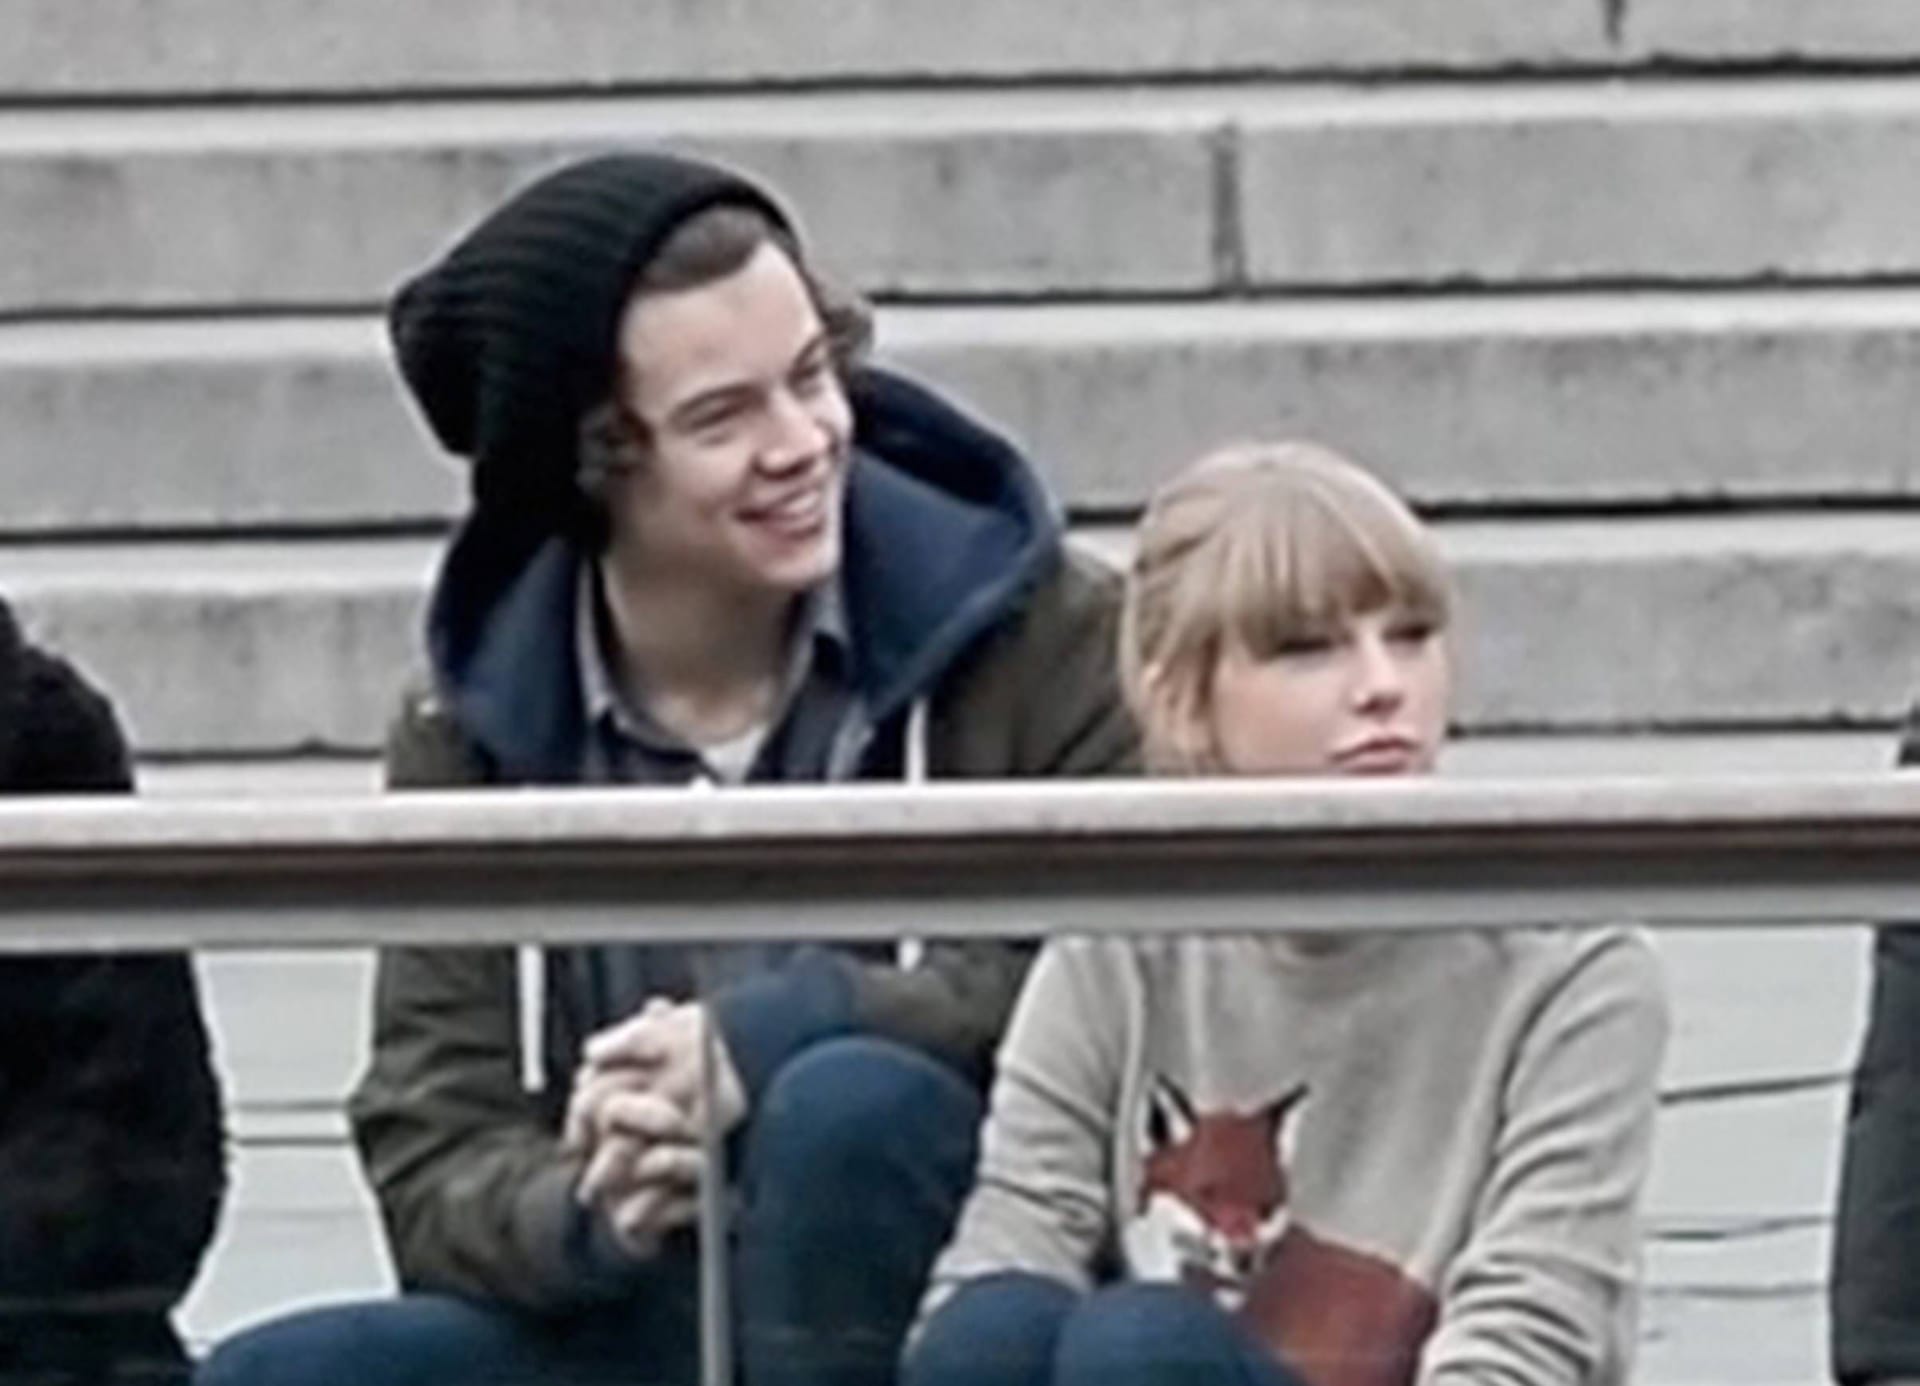 Harry Styles und Taylor Swift 2012 im Central Park Zoo in New York City